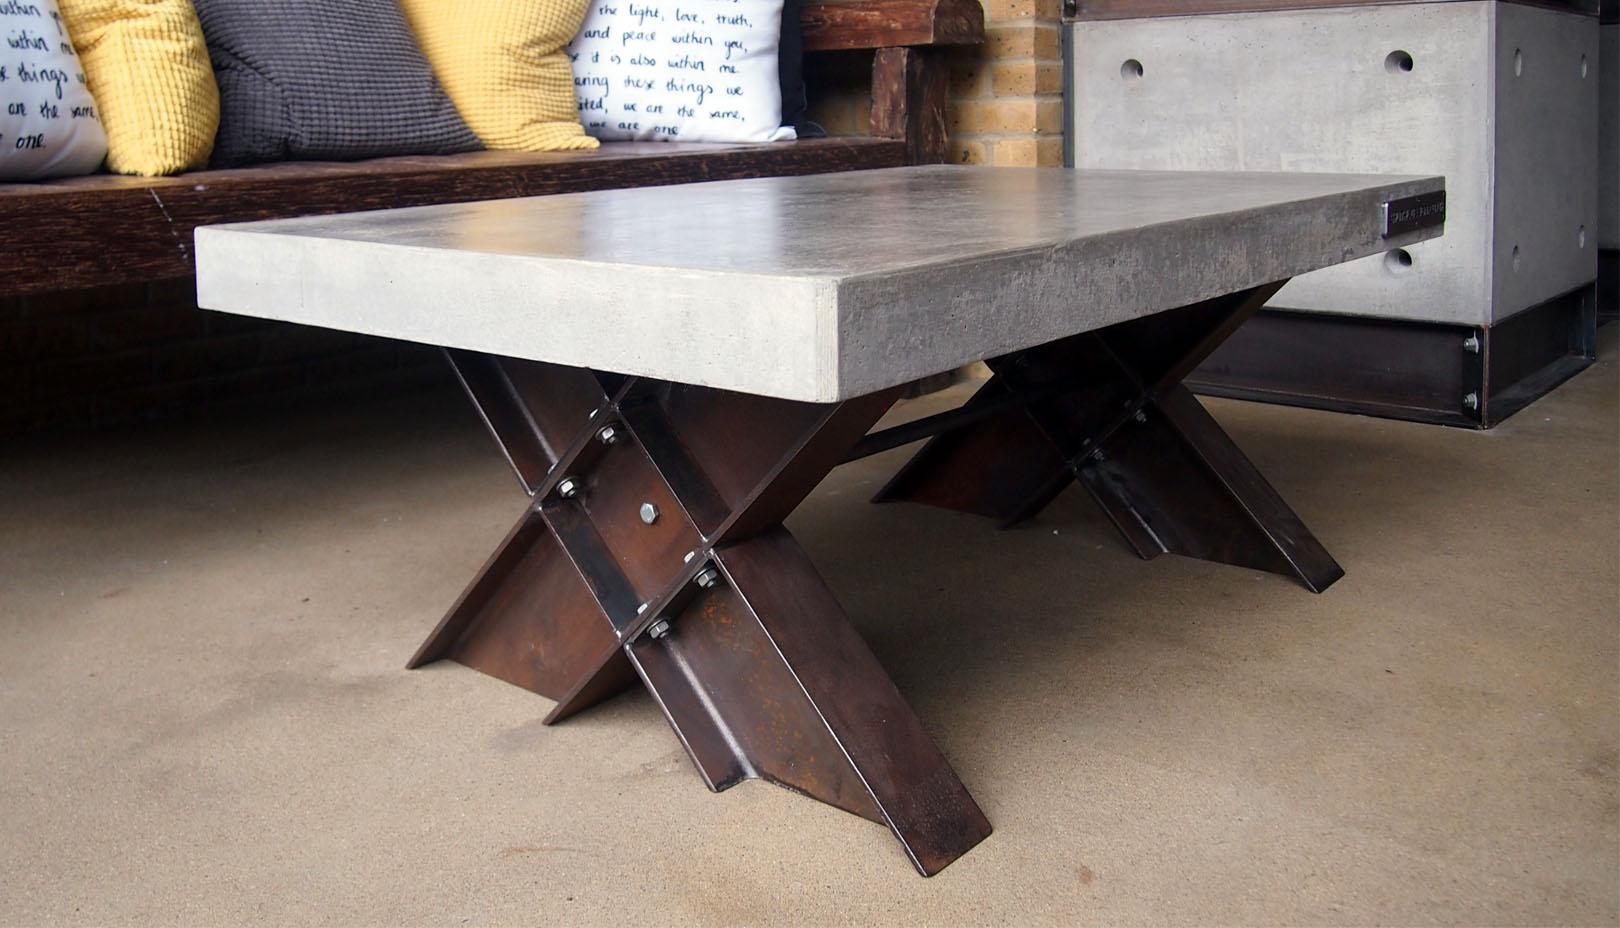 Polished Concrete Coffee Table By Brutal Design London